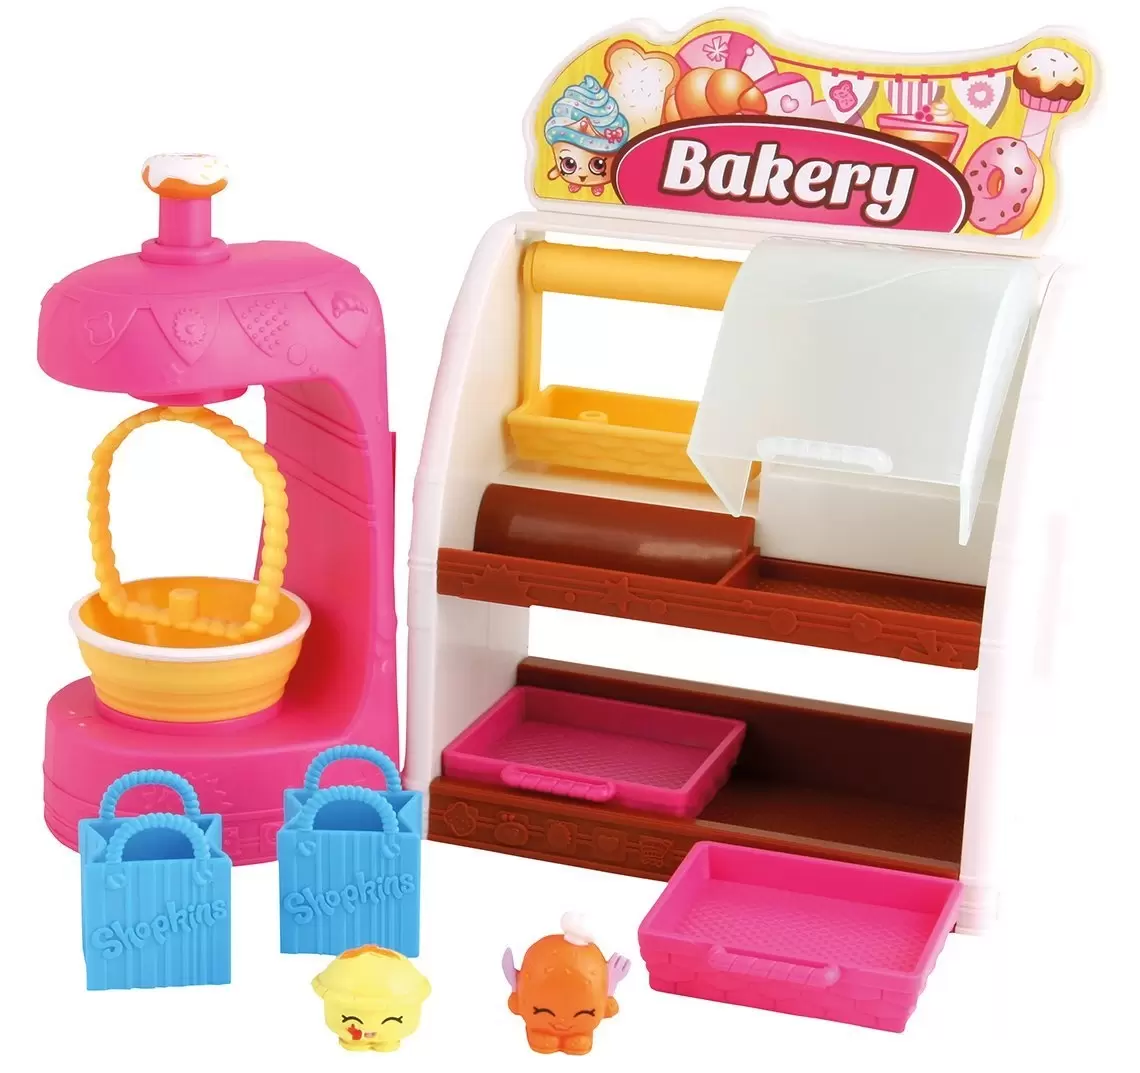 Shoppies, Shoppets, Lil\' Secrets and Mini Pack - Bakery Stand